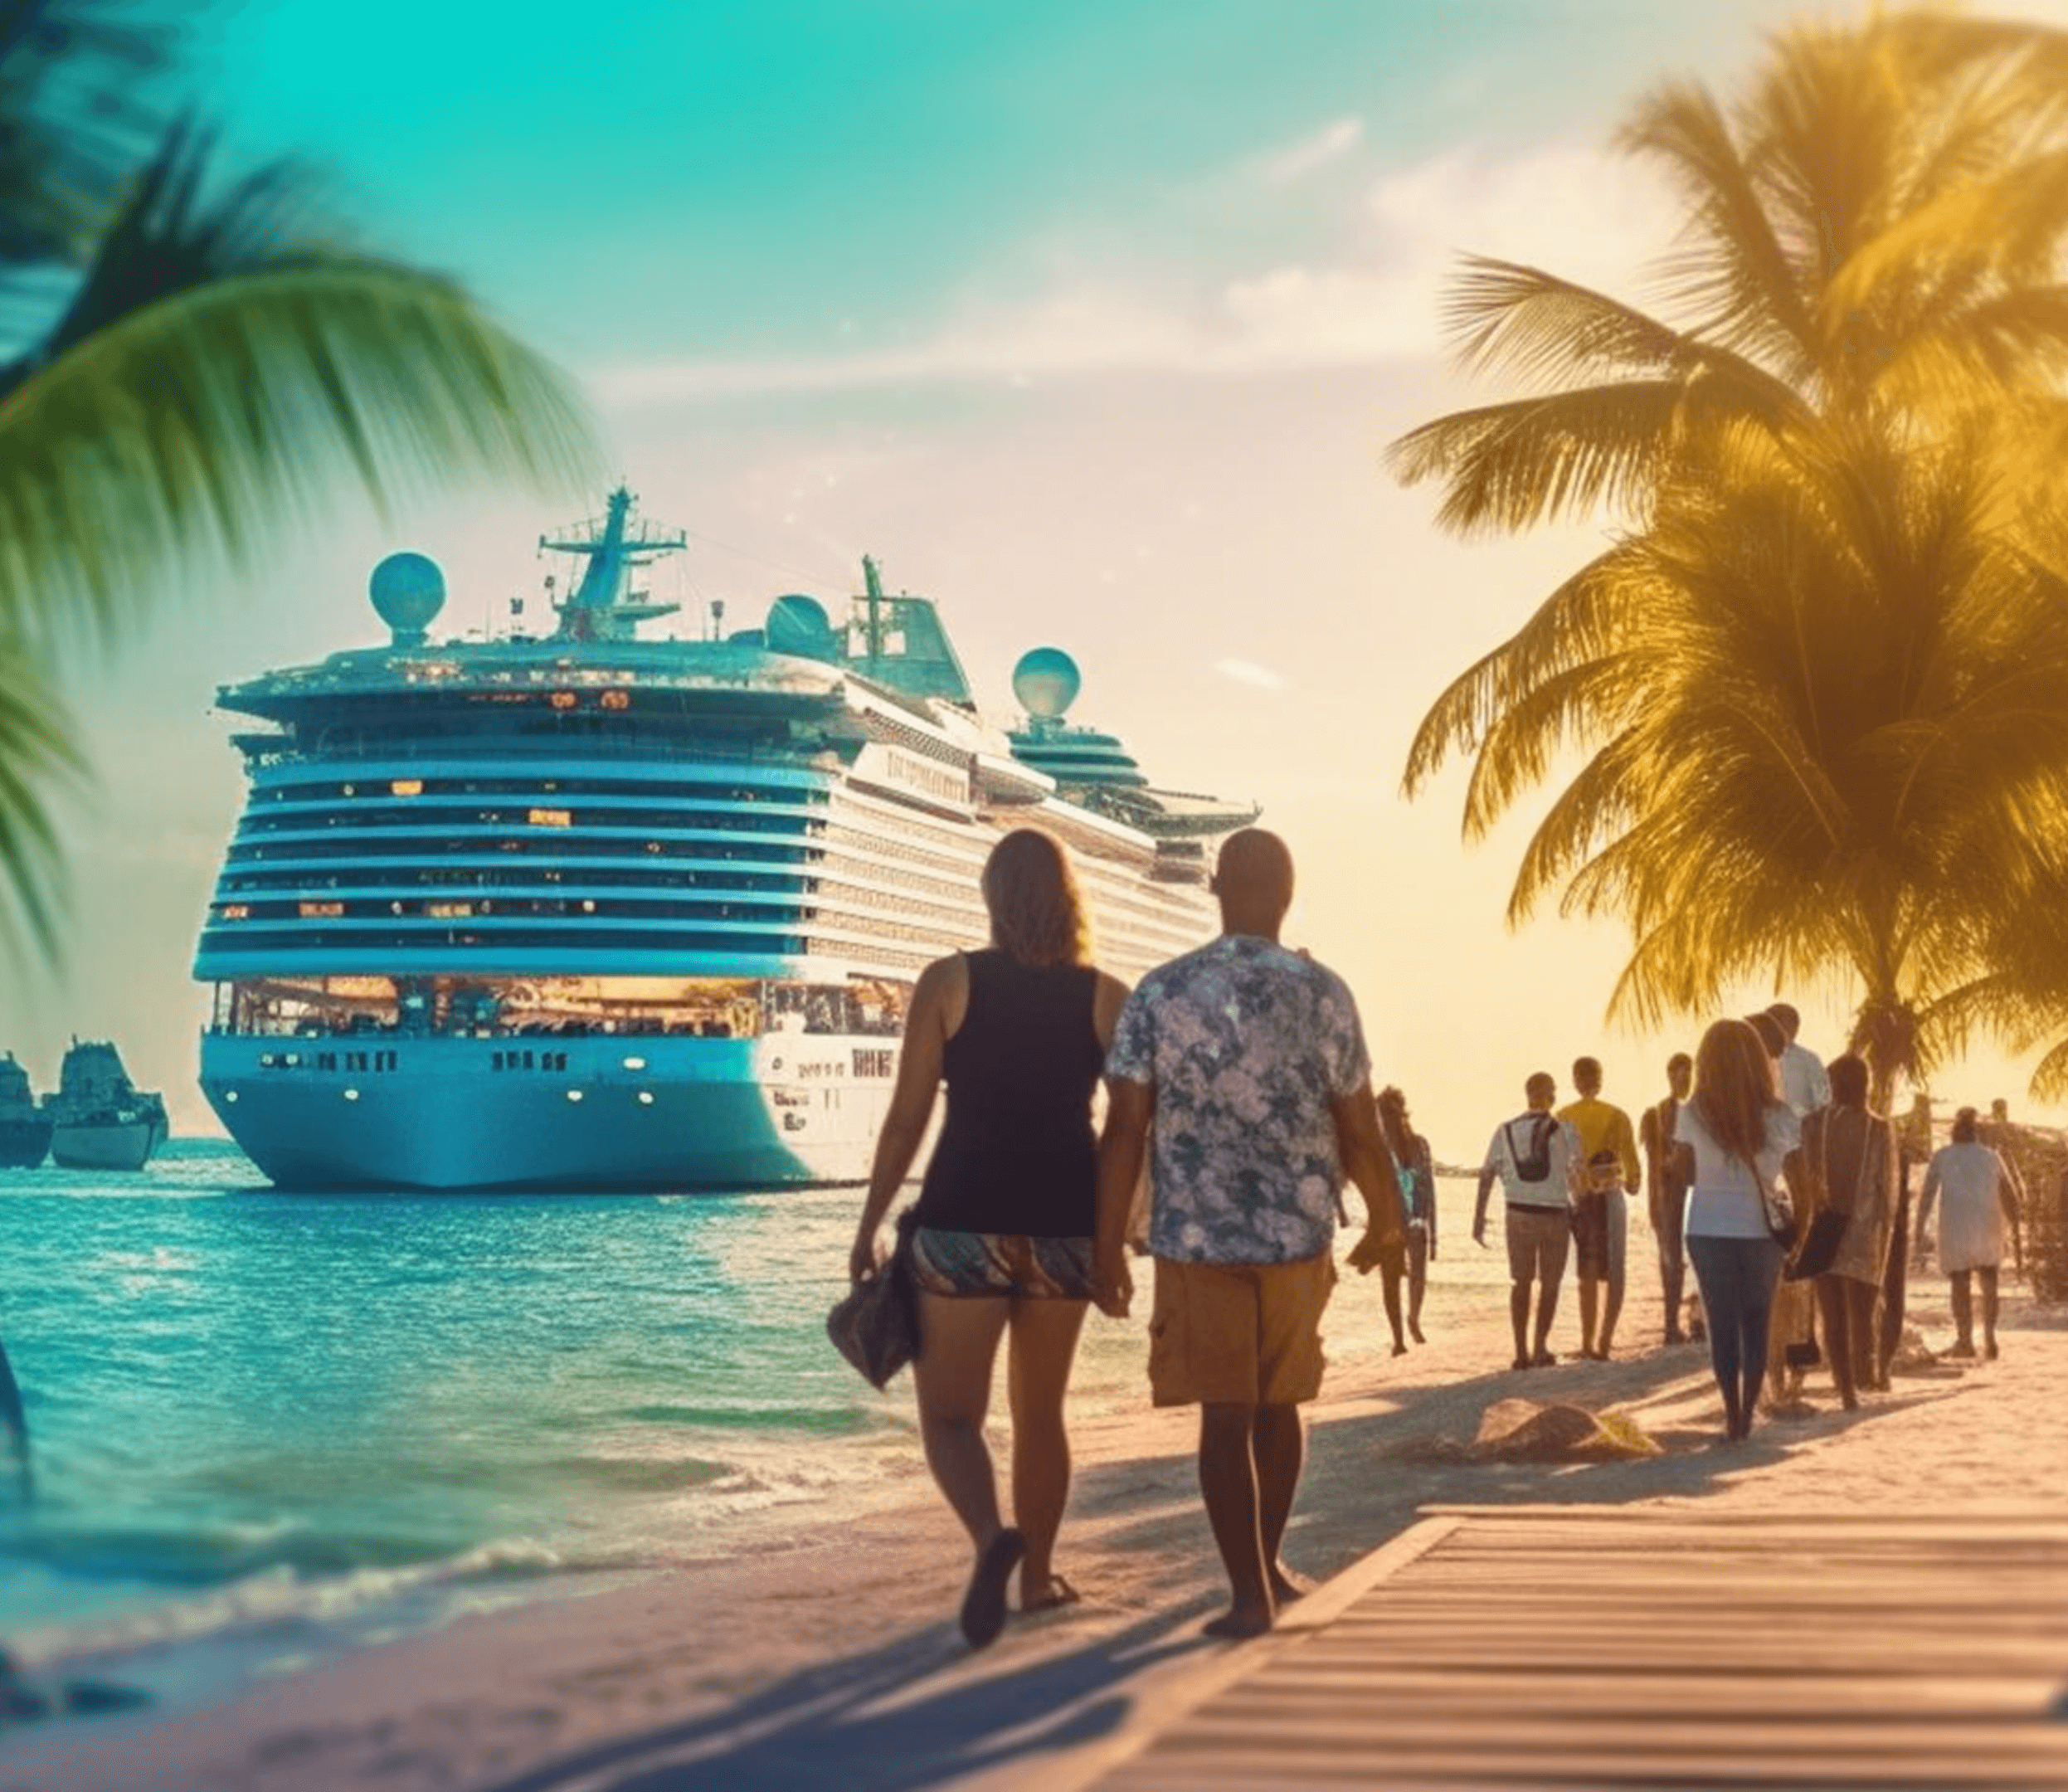 Royal Caribbean edition of luxury and adventure